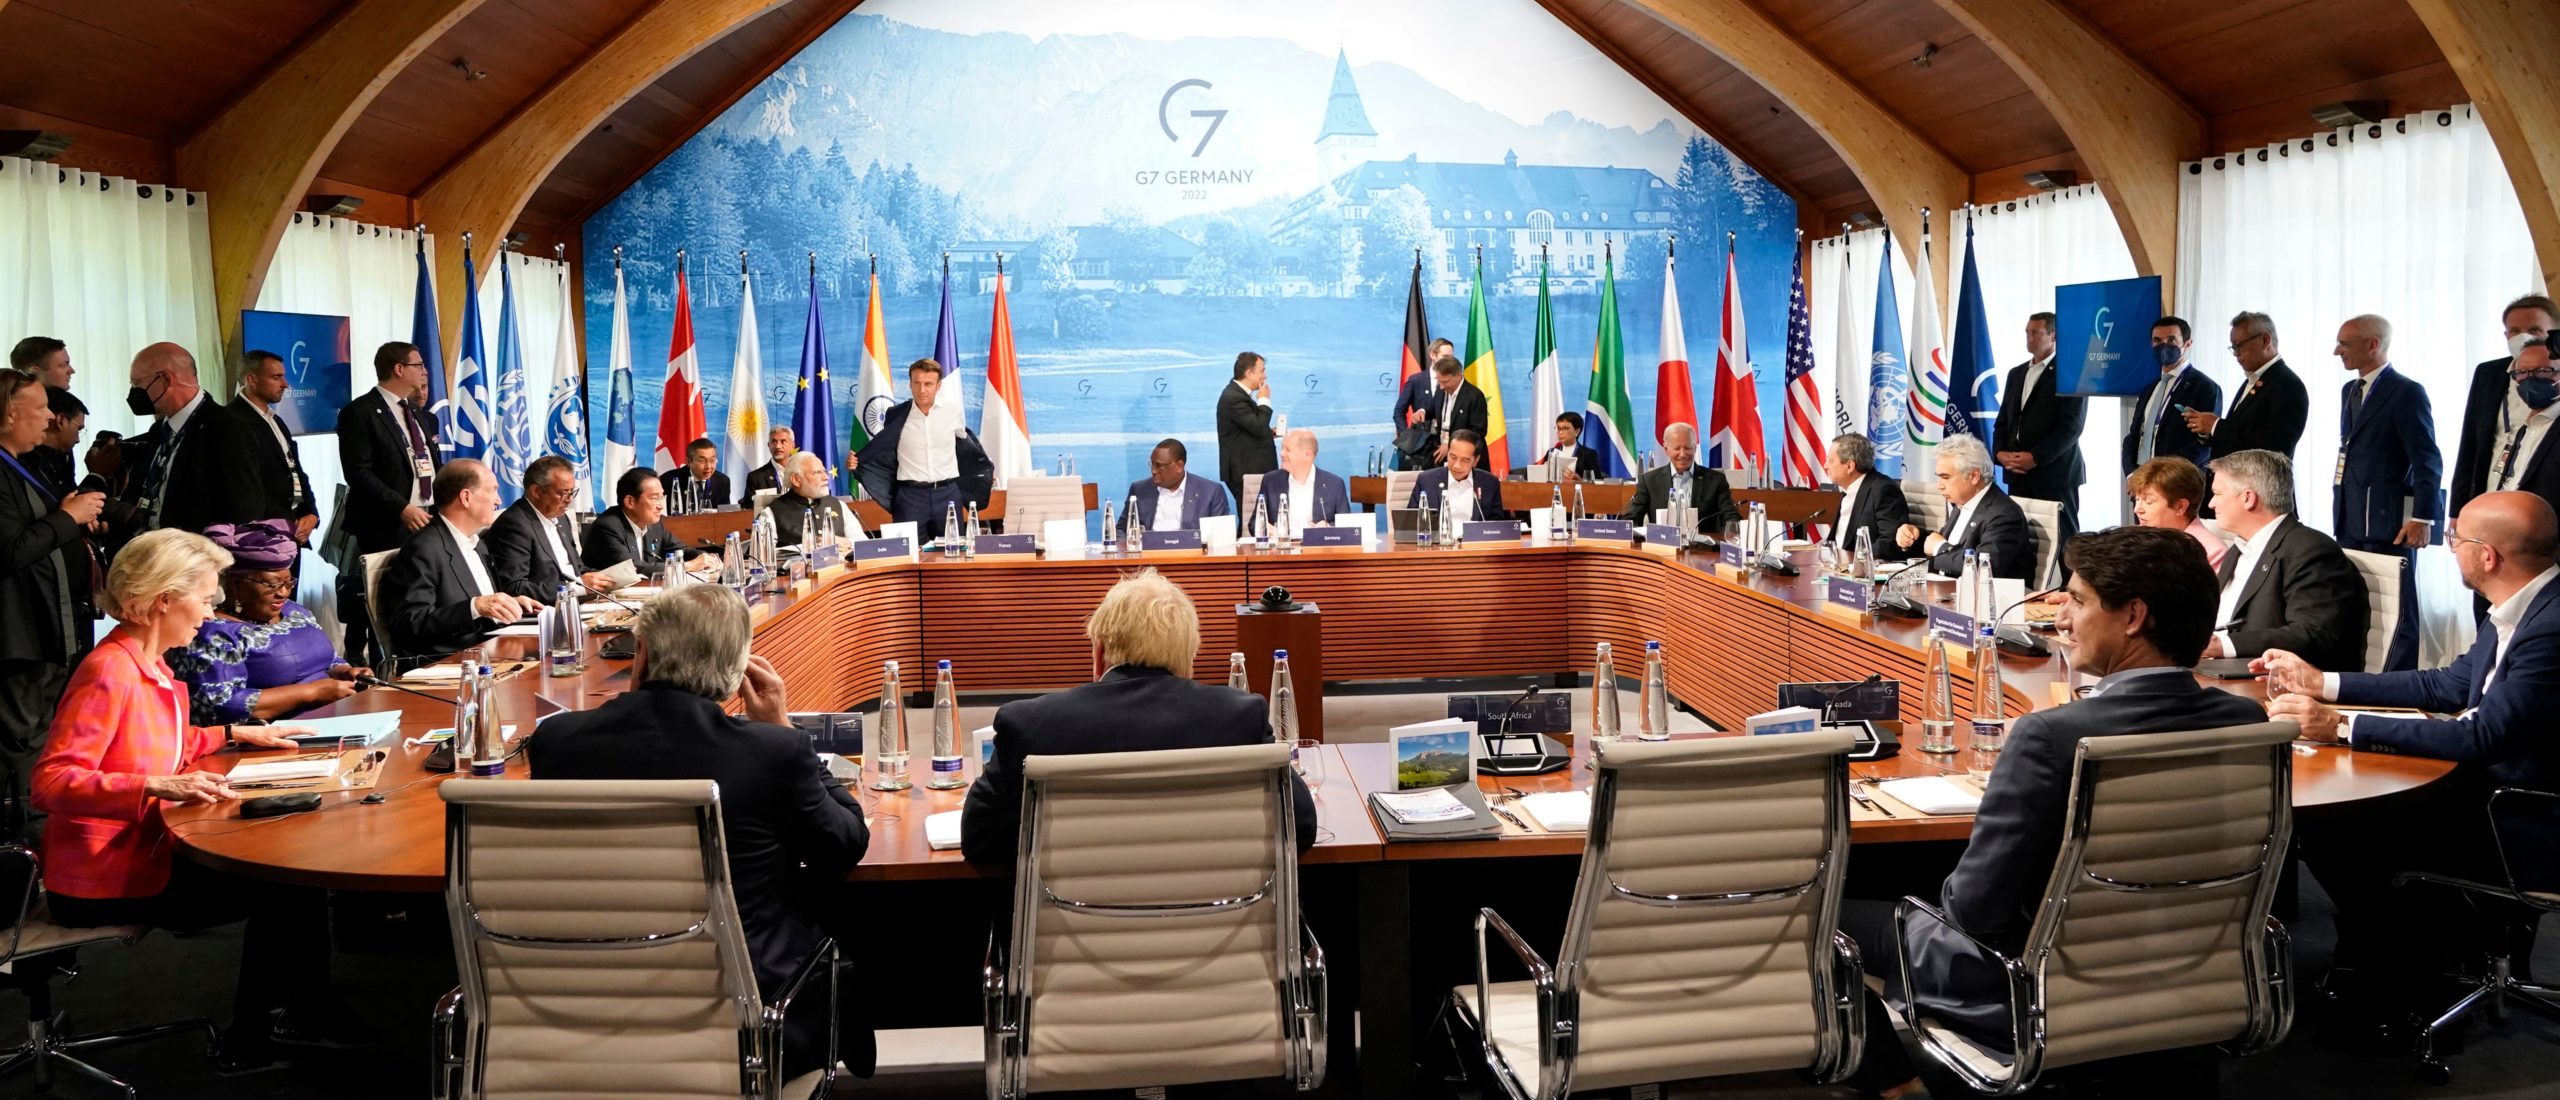 is-the-global-climate-agenda-dead-g7-turns-to-fossil-fuels-amid-energy-crisis